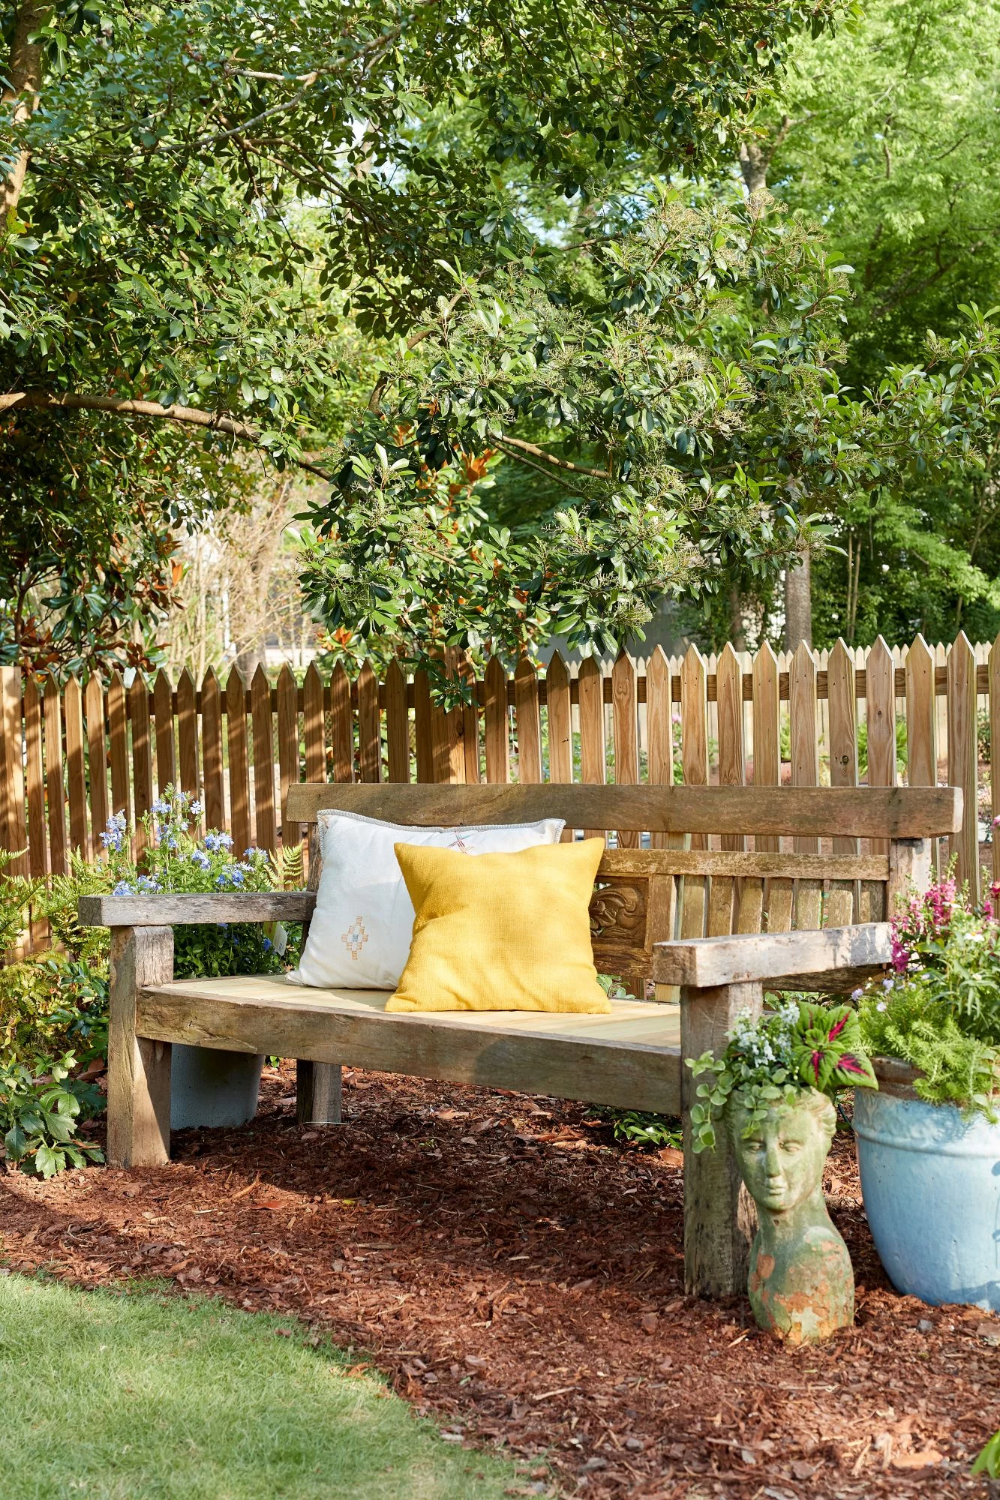 The Charm of a Compact Garden Bench